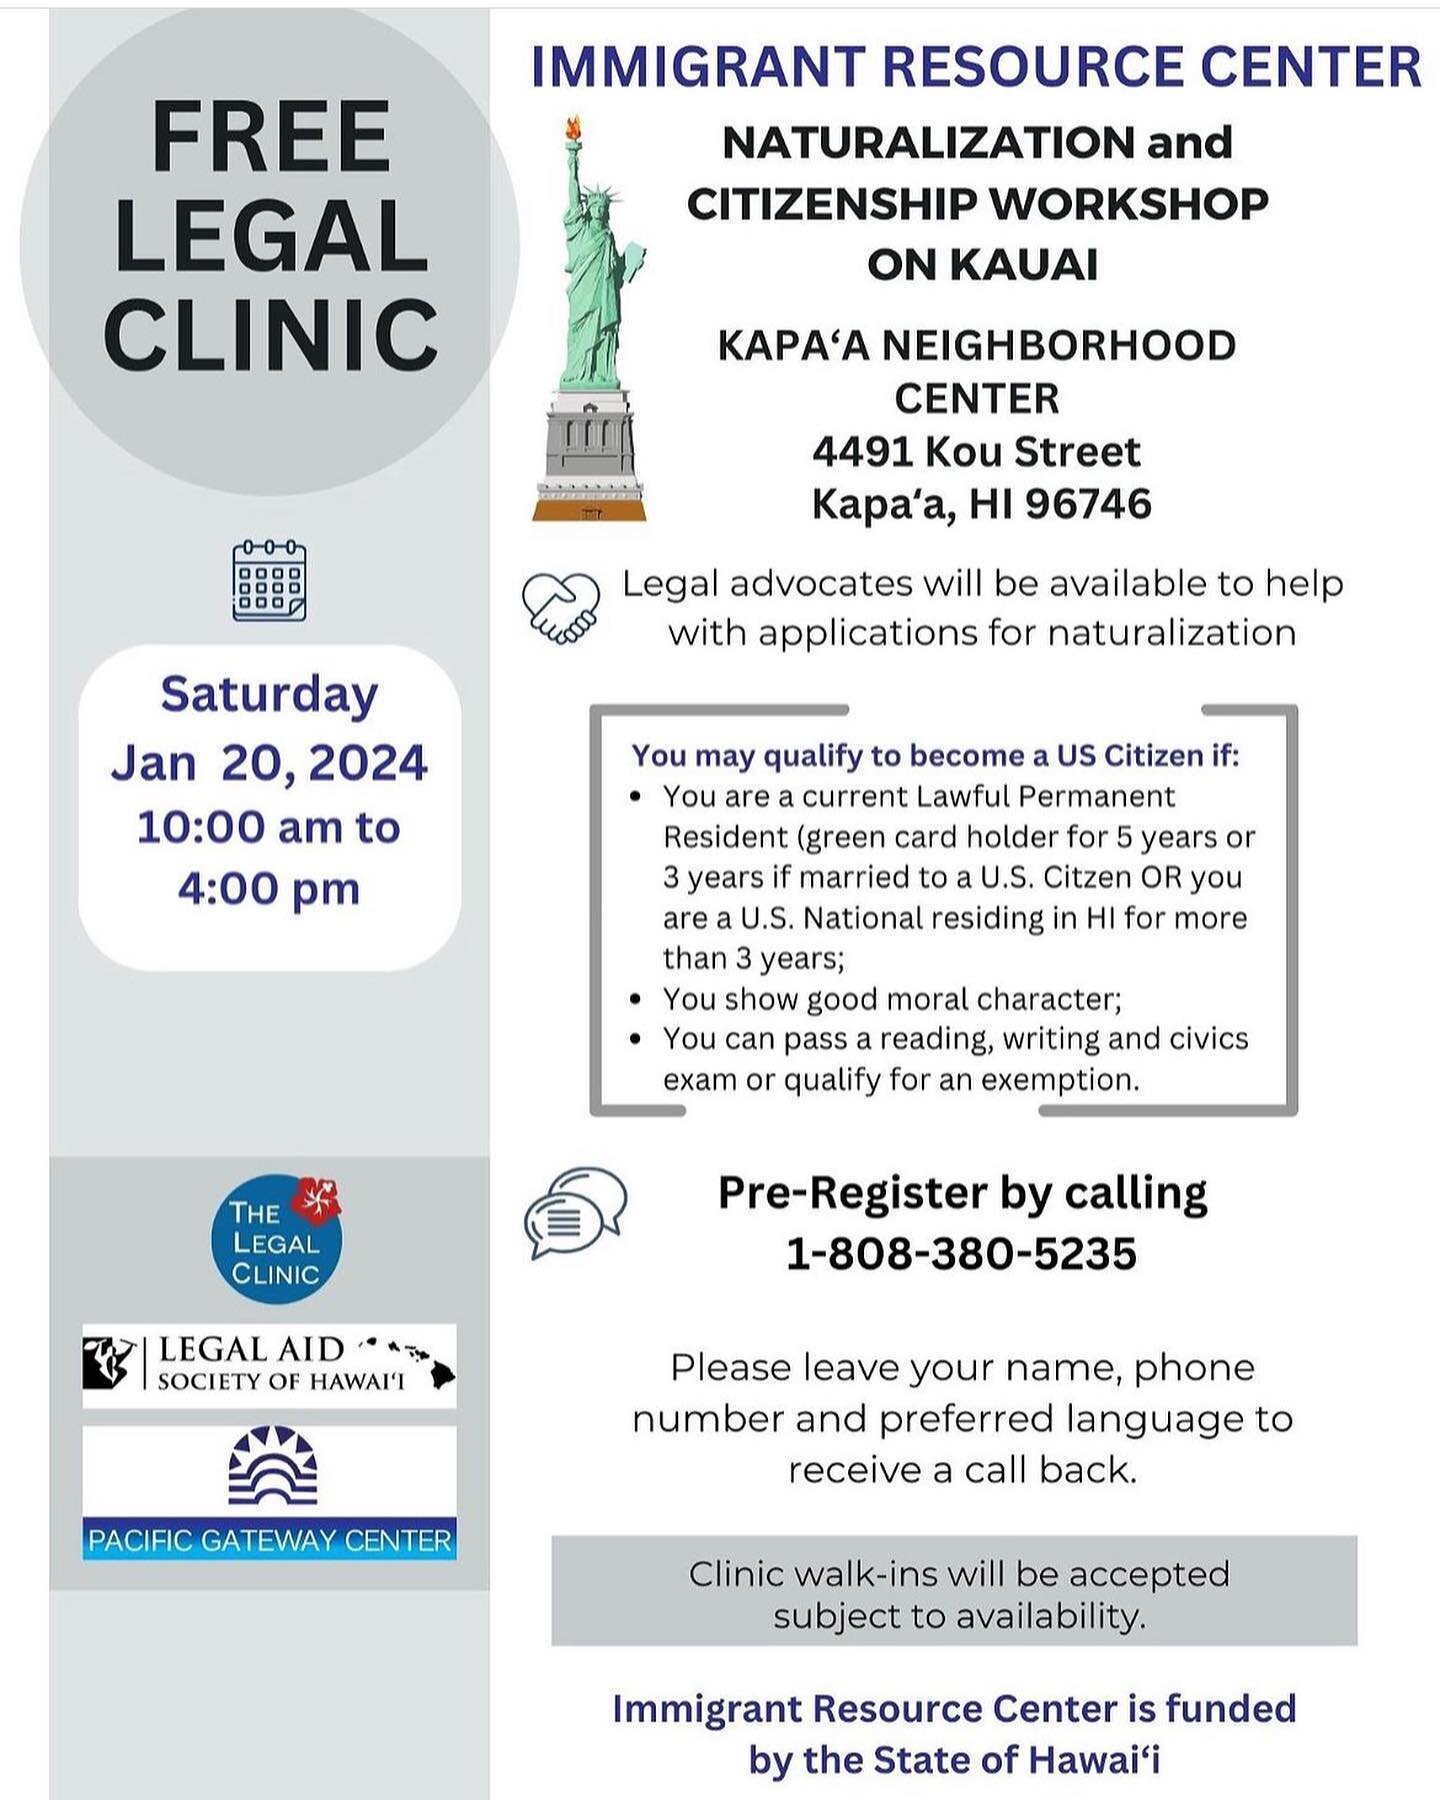 Free Legal Clinic on Kauai Jan. 20, 2024. To pre-register, you may call 1-800-380-5235. Feel free to share. 🌺
&bull;
Swipe ➡️ to see translations in Marshallese, Japanese, Ilokano, Tagalog, and Chinese.
&bull;
Clinic walk-ins will be subject to avai